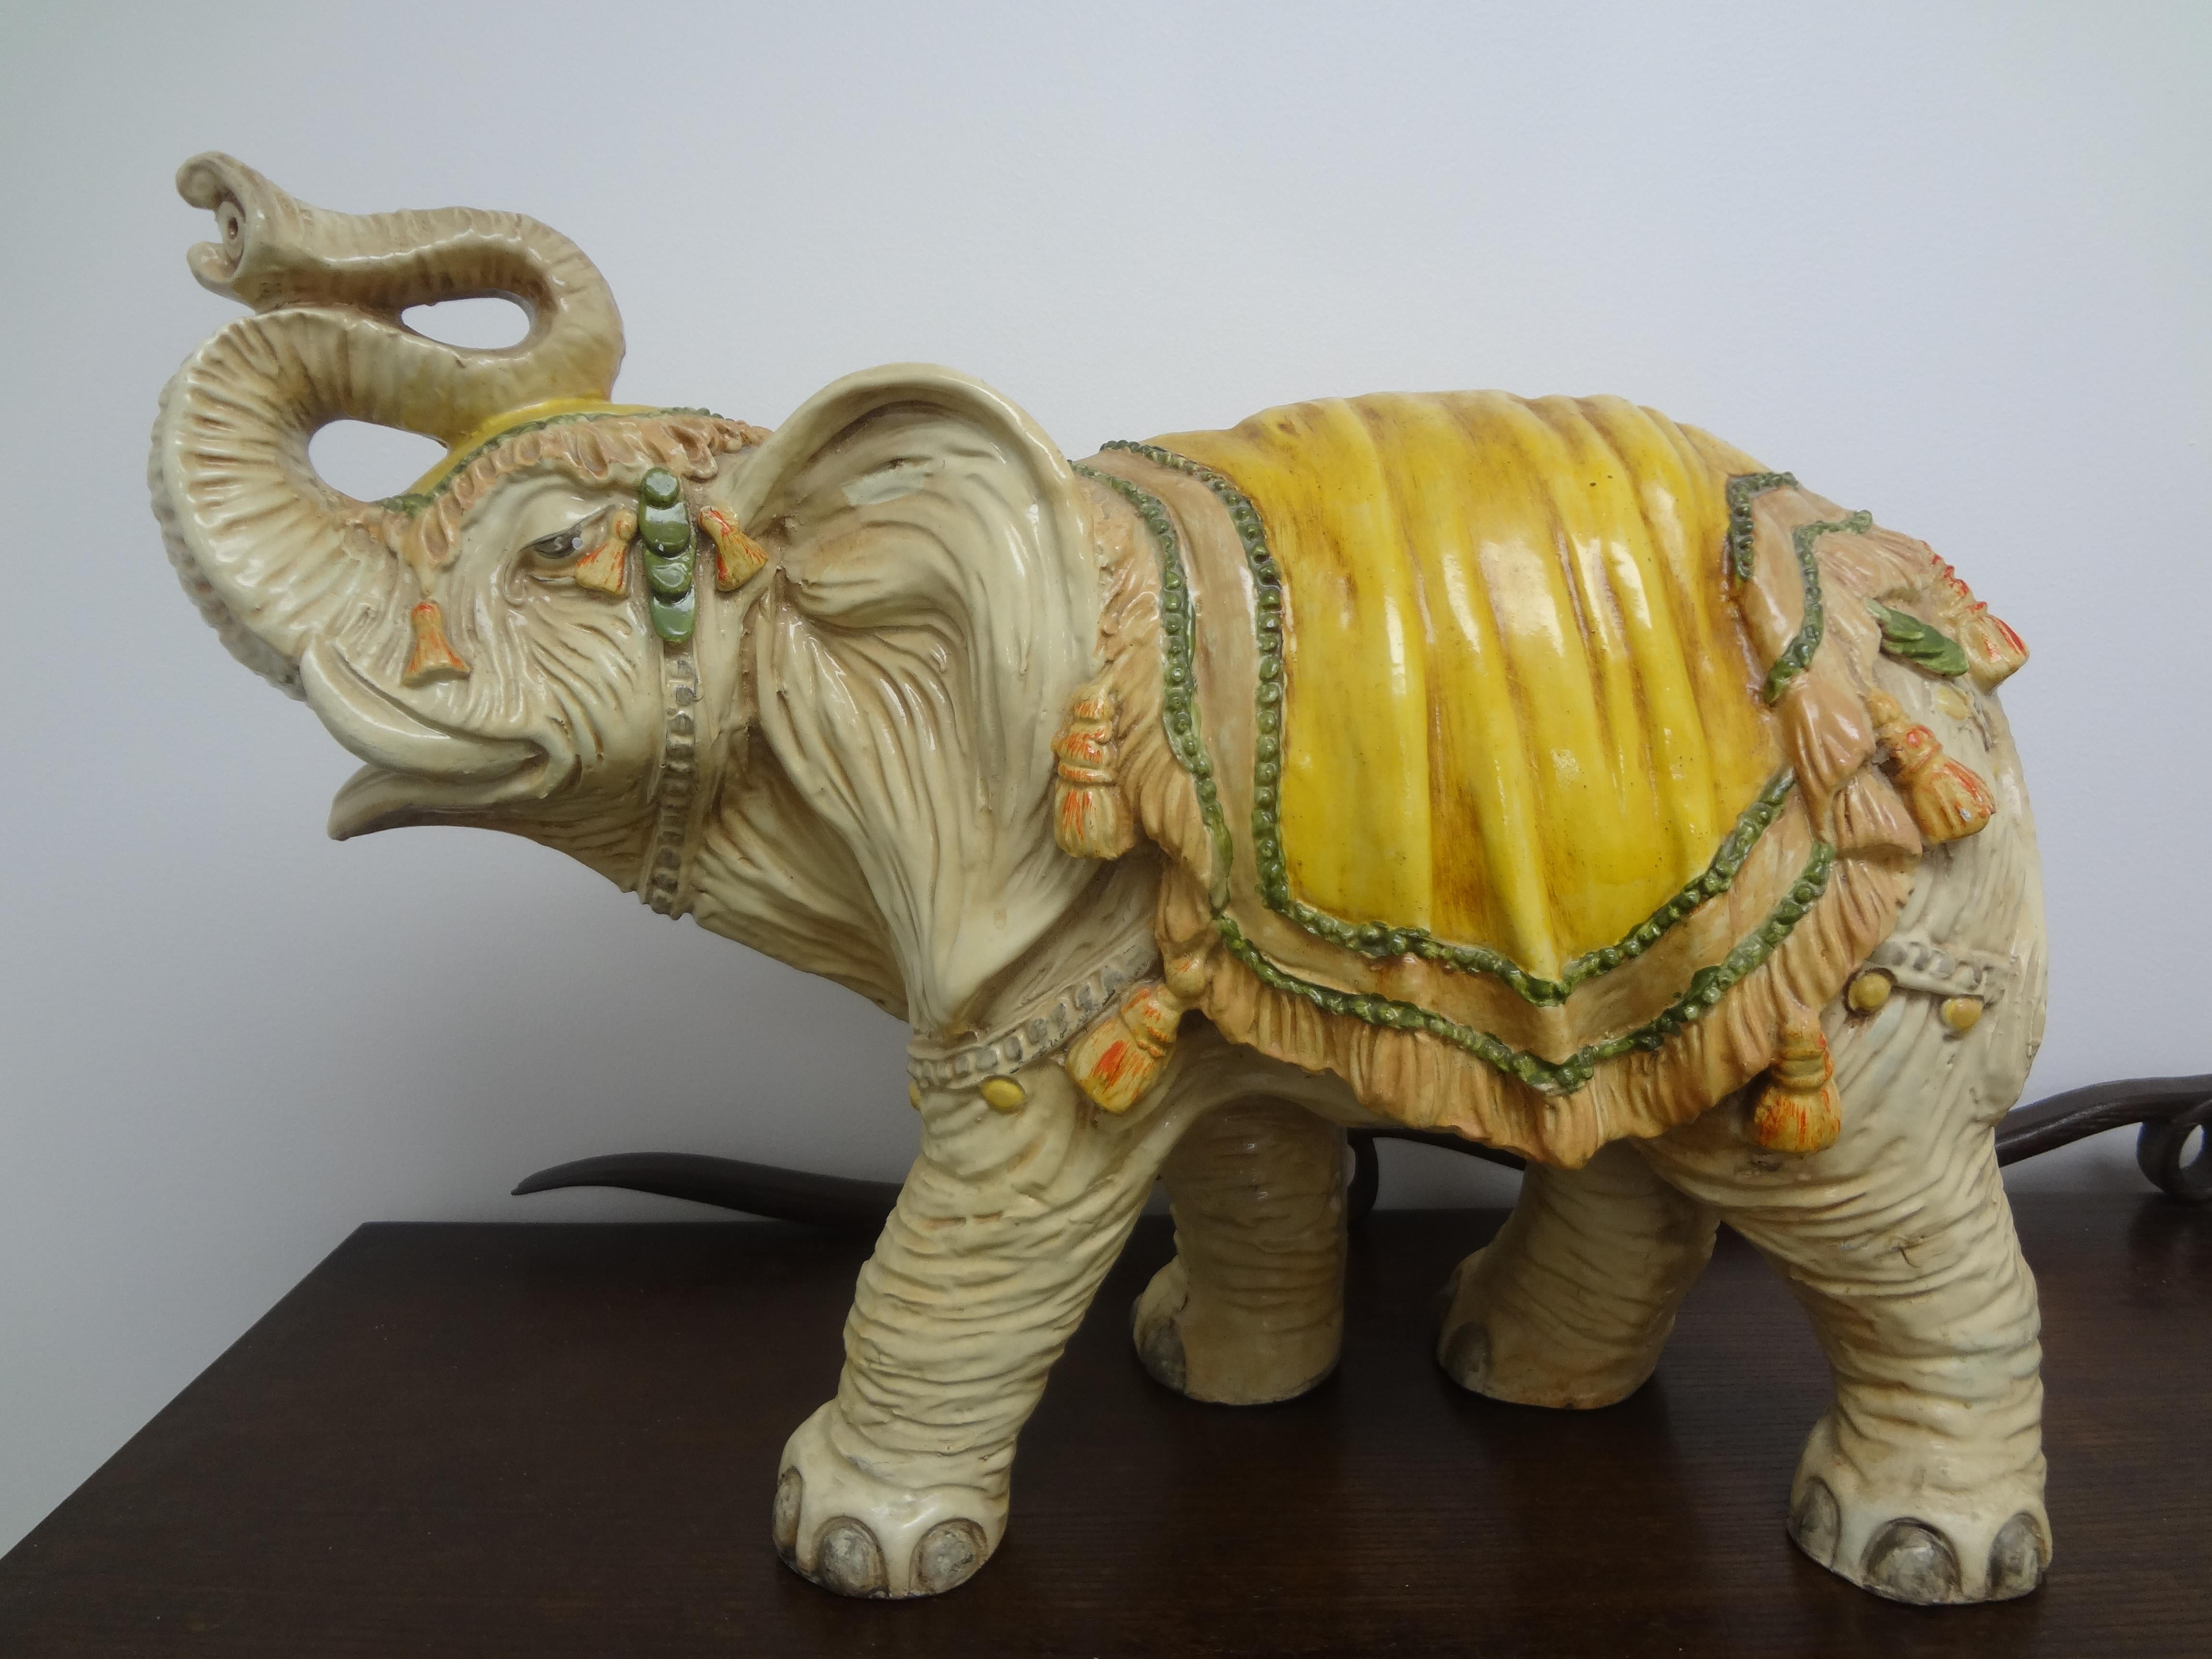 Large Hollywood Regency polychrome elephant sculpture.
Large Hollywood Regency polychrome elephant sculpture or statue. Great whimsical decorative accessory!